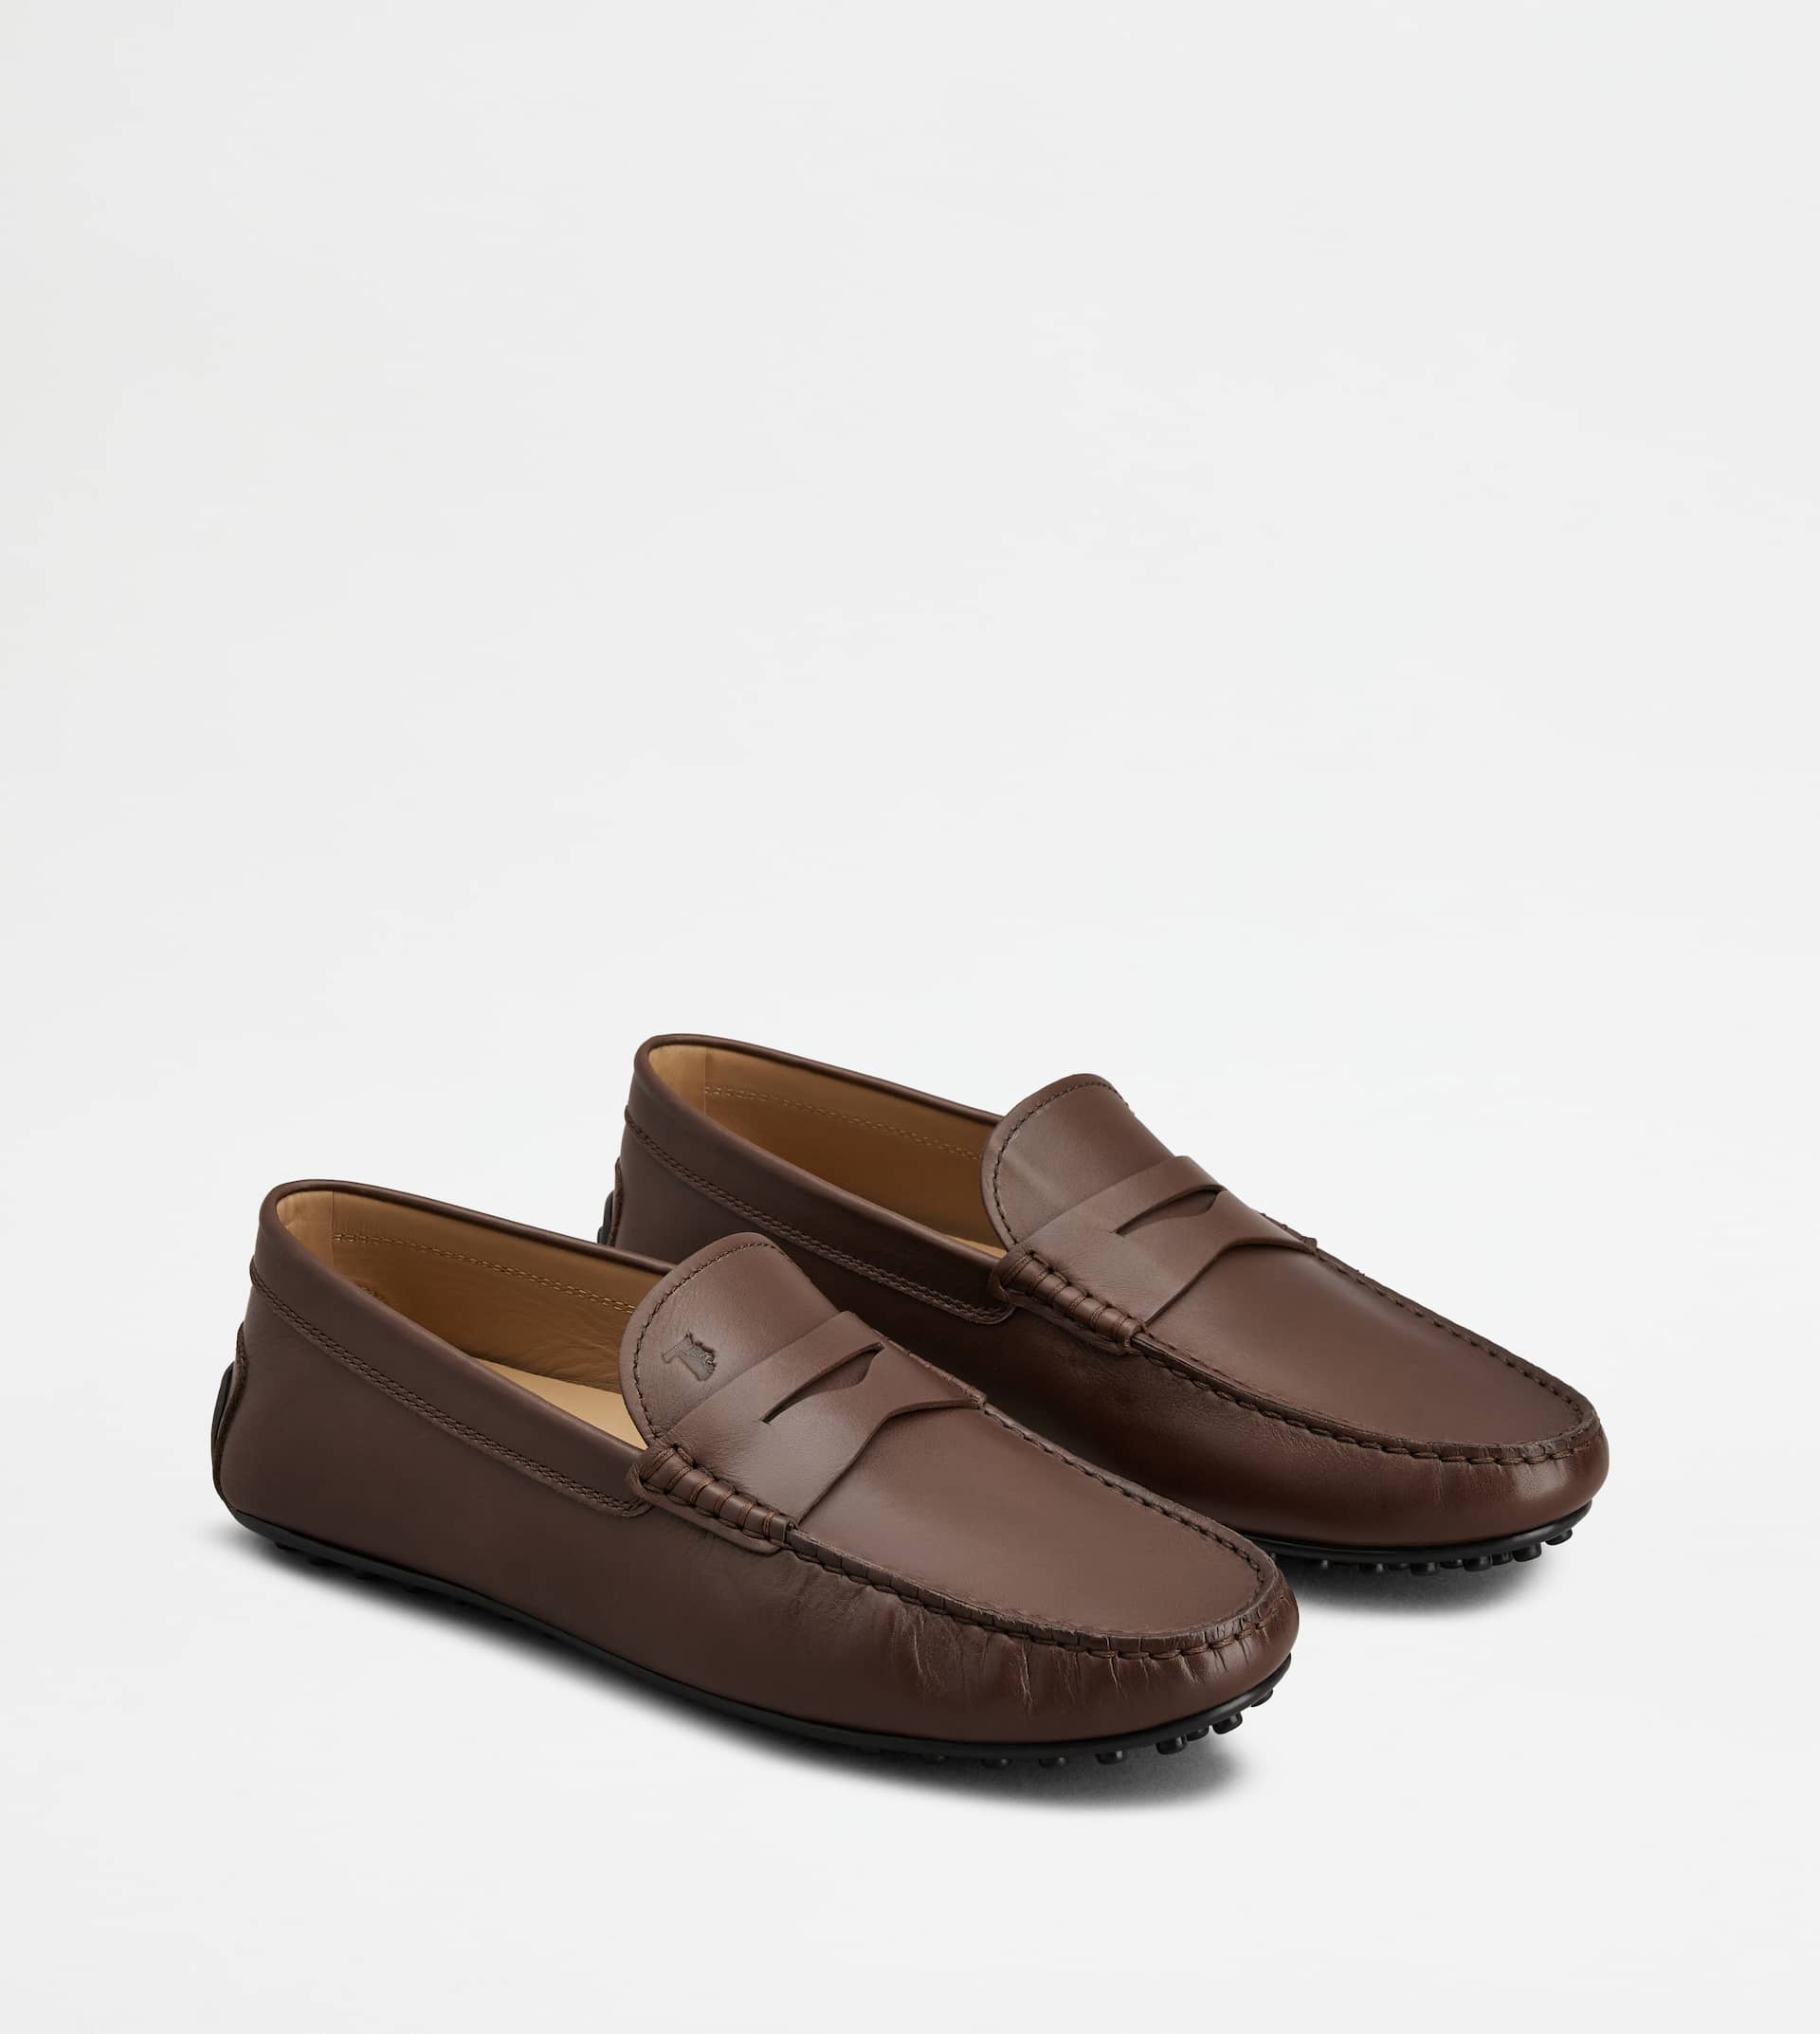 CITY GOMMINO DRIVING SHOES IN LEATHER - BROWN - 3